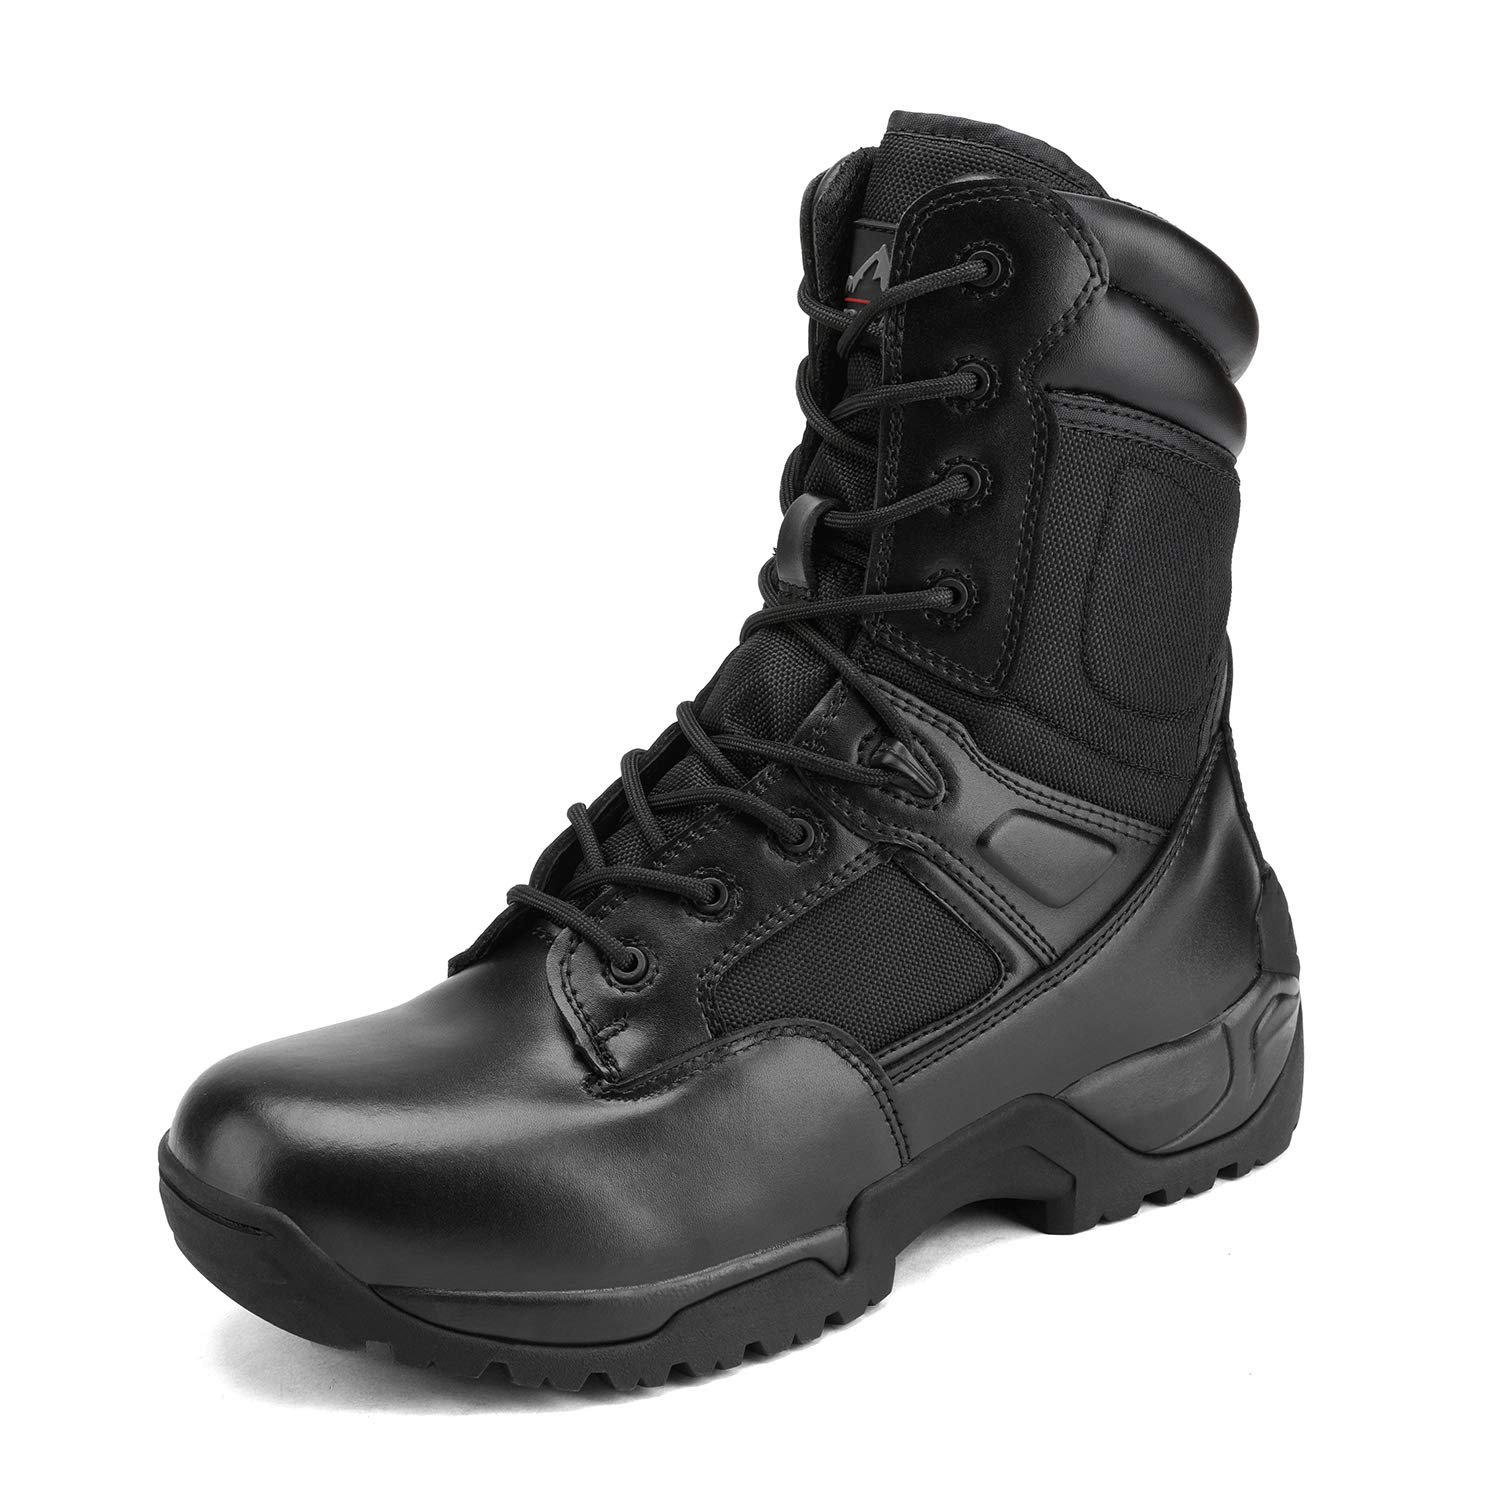 Nortiv 8 Mens Military Tactical Work Boots Side Zip Hiking Motorcycle Combat Boots Black 7 Wide Response-W